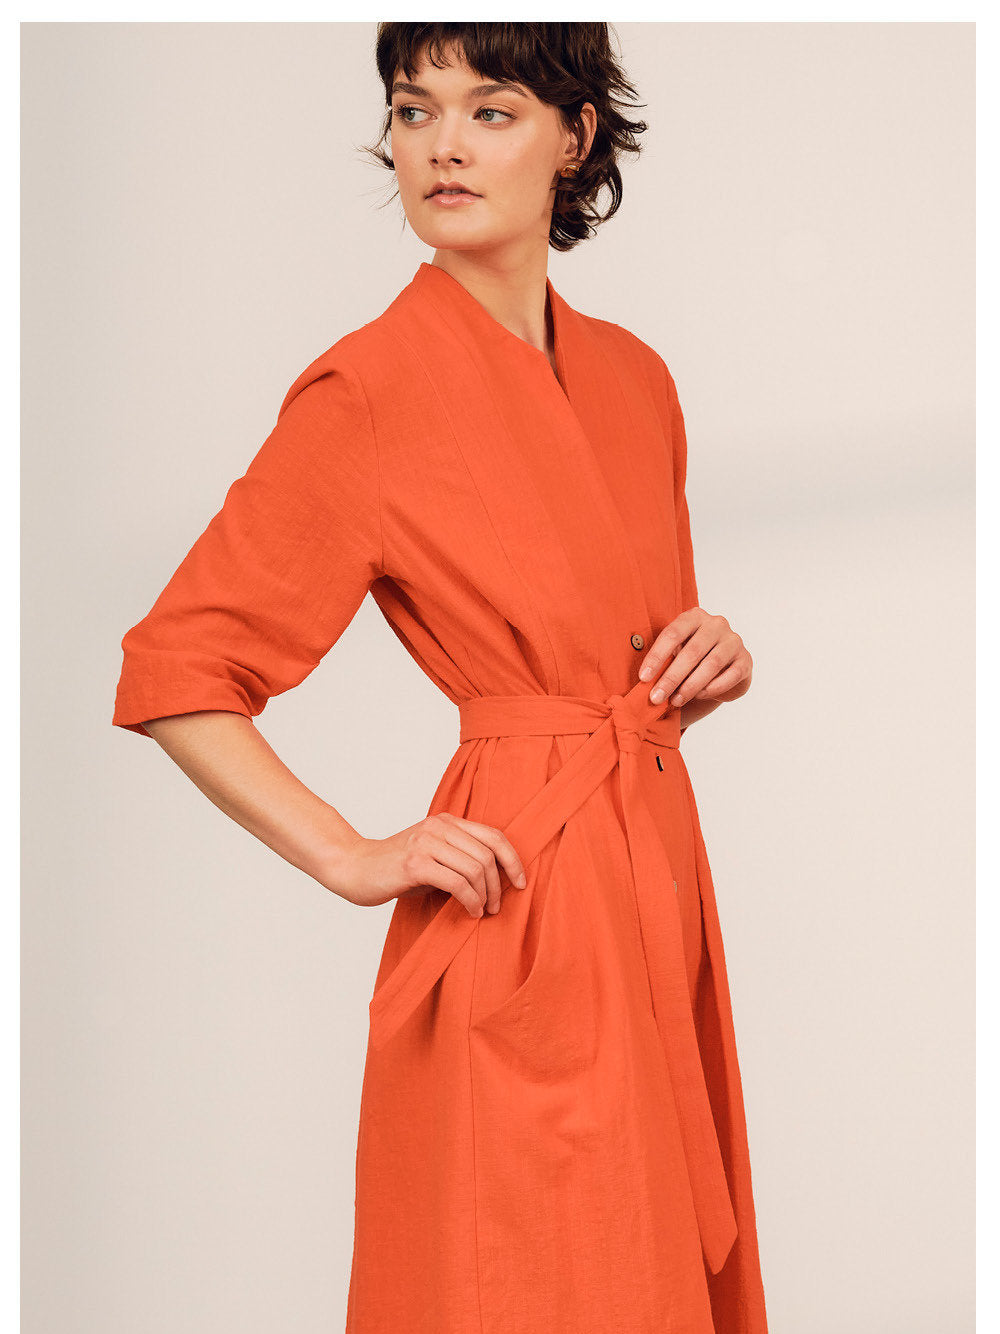 Jennifer Glasgow - SS24 - SS24 -Orlop Dress in Coral Red - Side close-up 4 